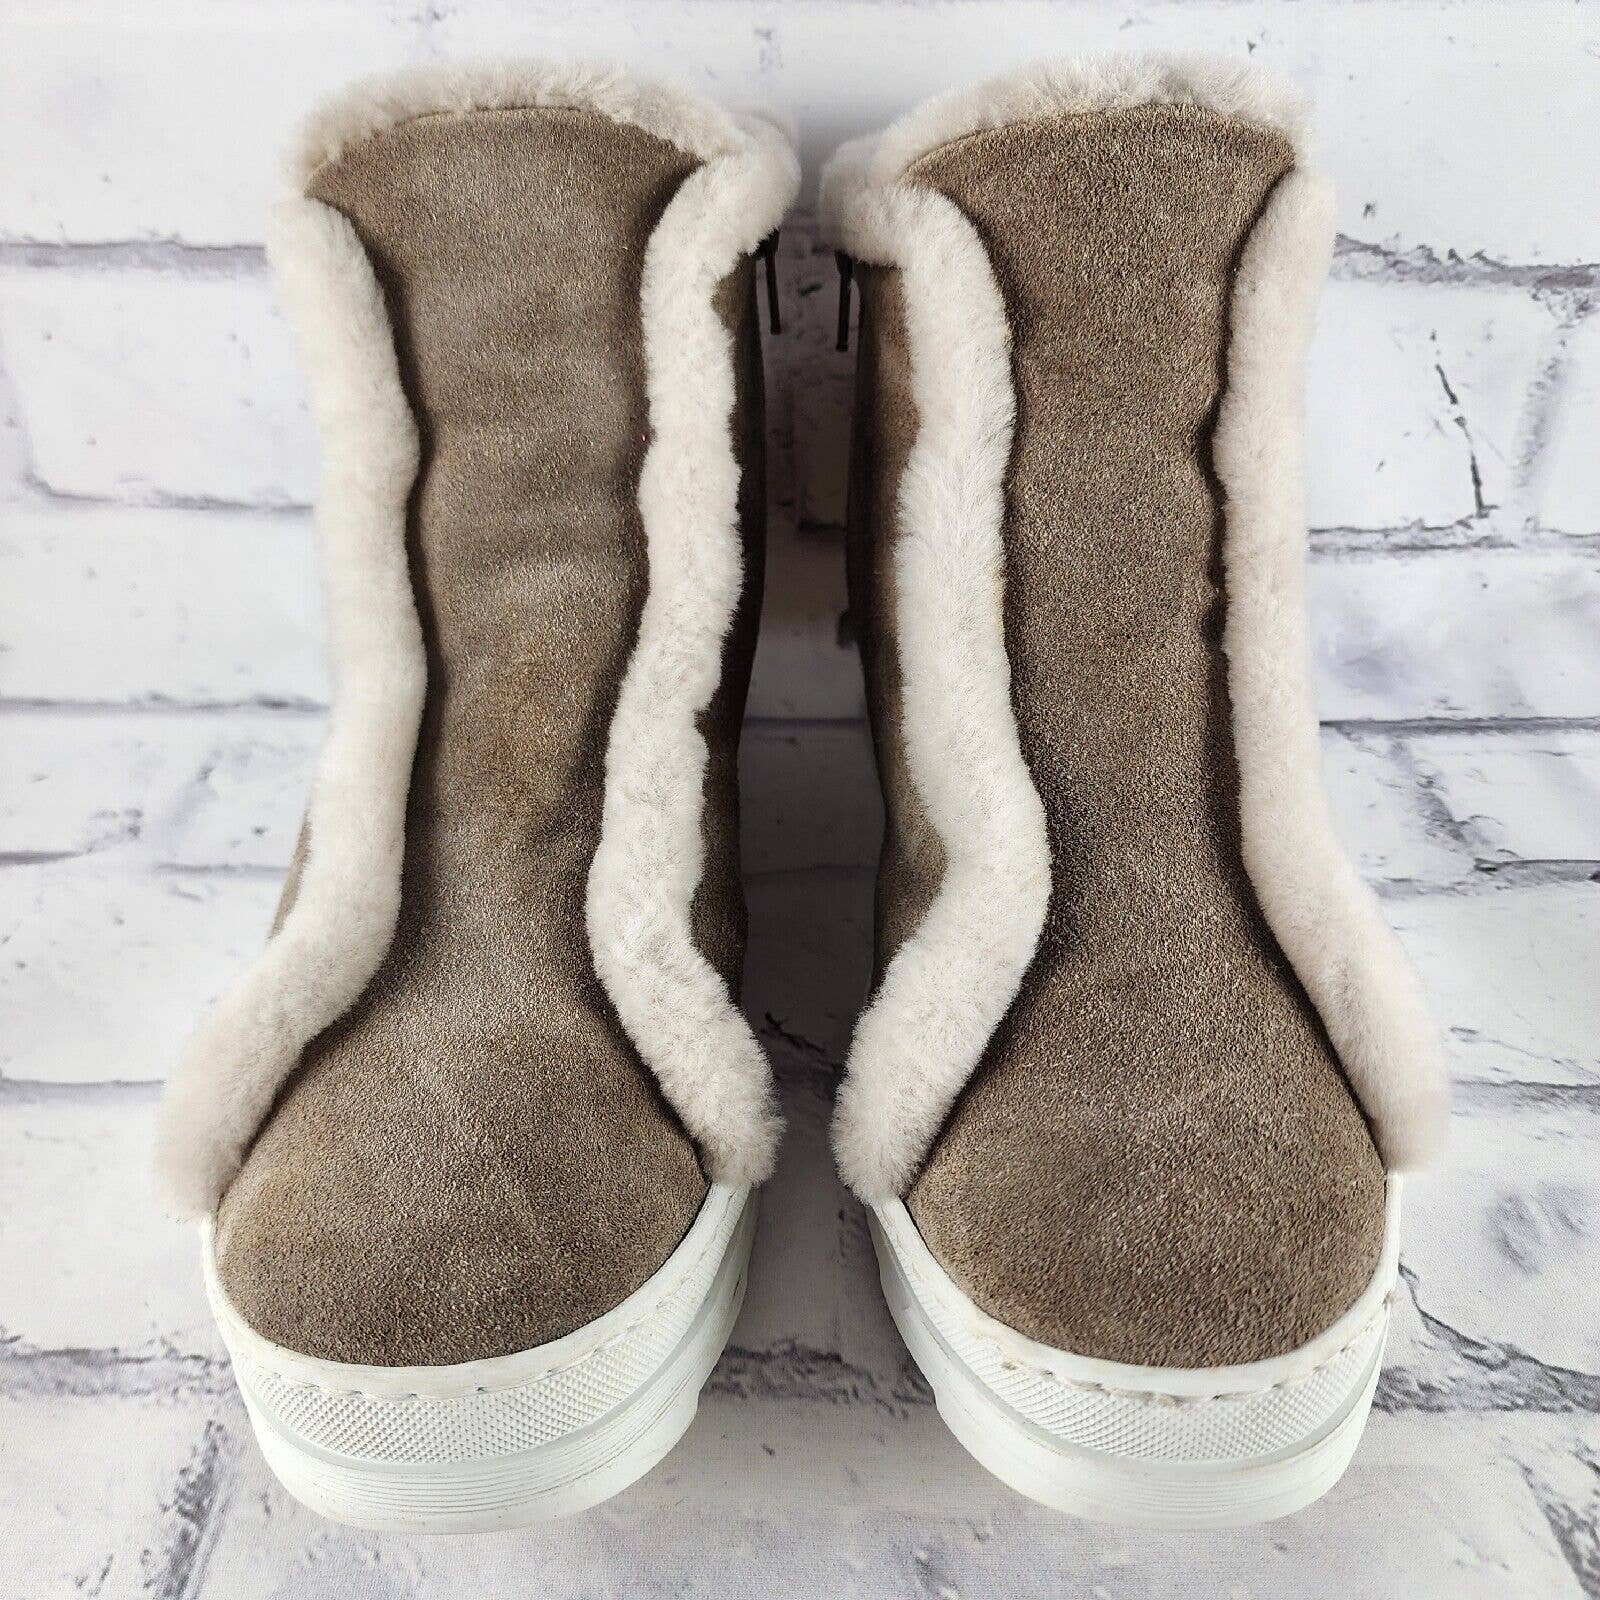 Joyks Winter Ankle Booties Women's 7.5 M Taupe Suede Fur Lined With Side Zipper